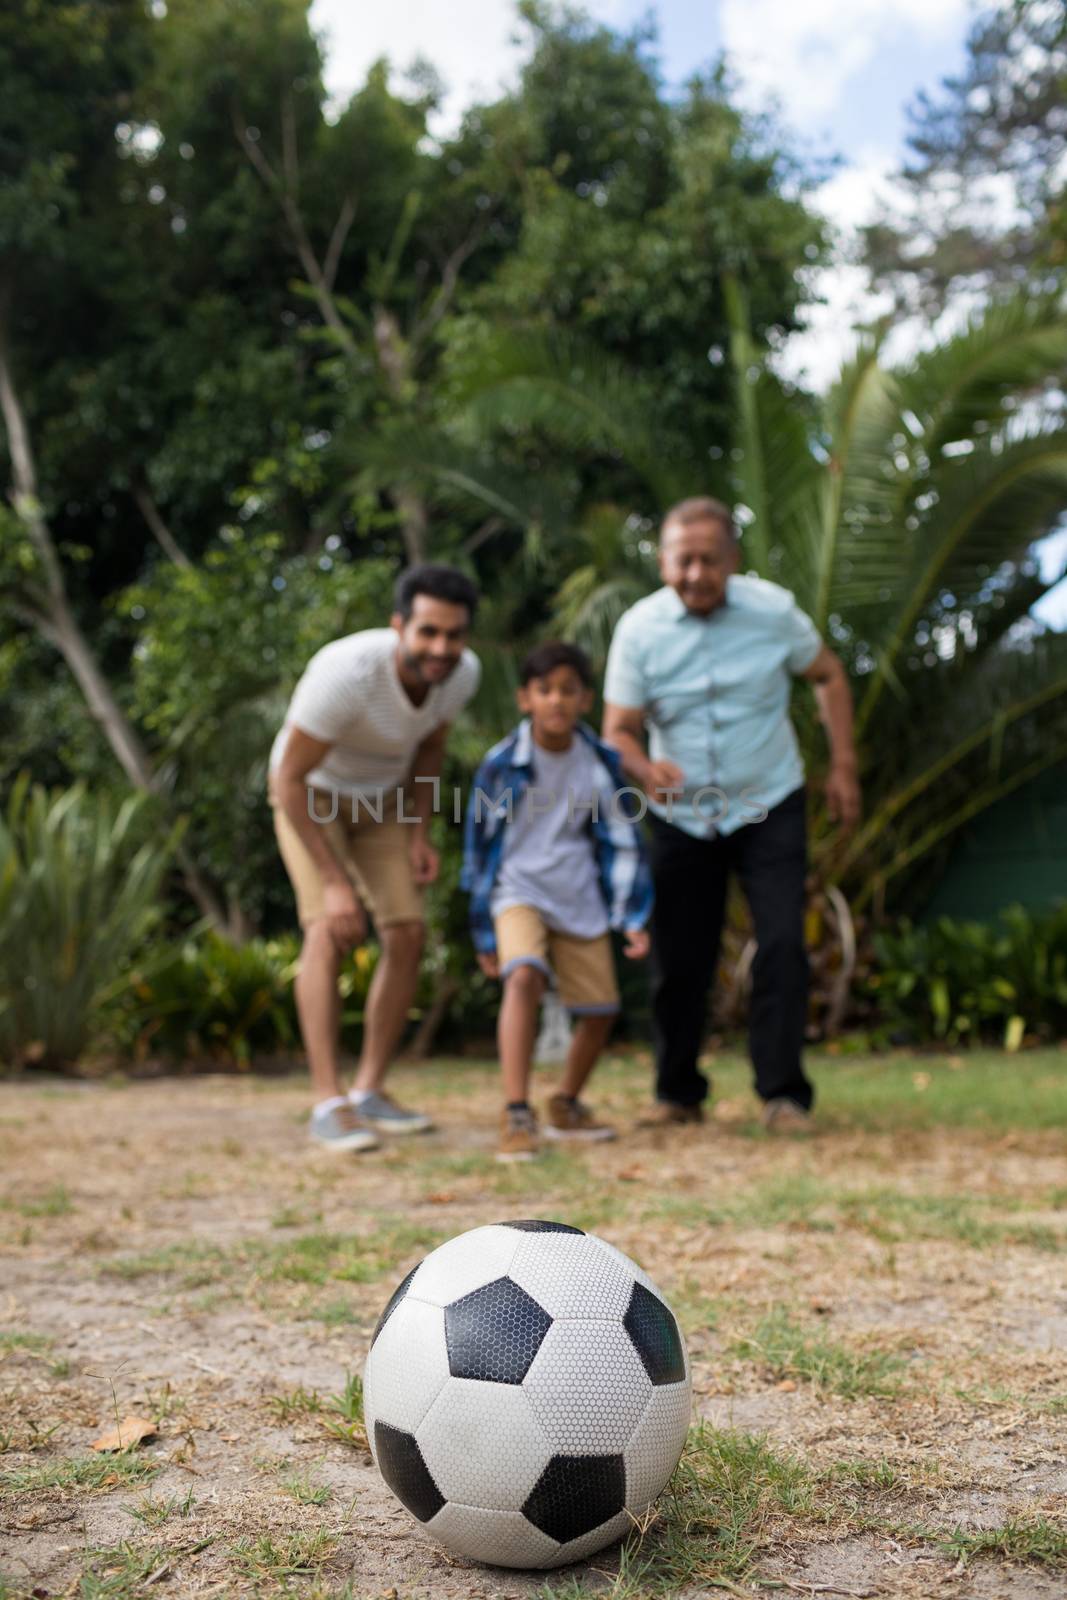 Family looking at soccer ball while playing in yard